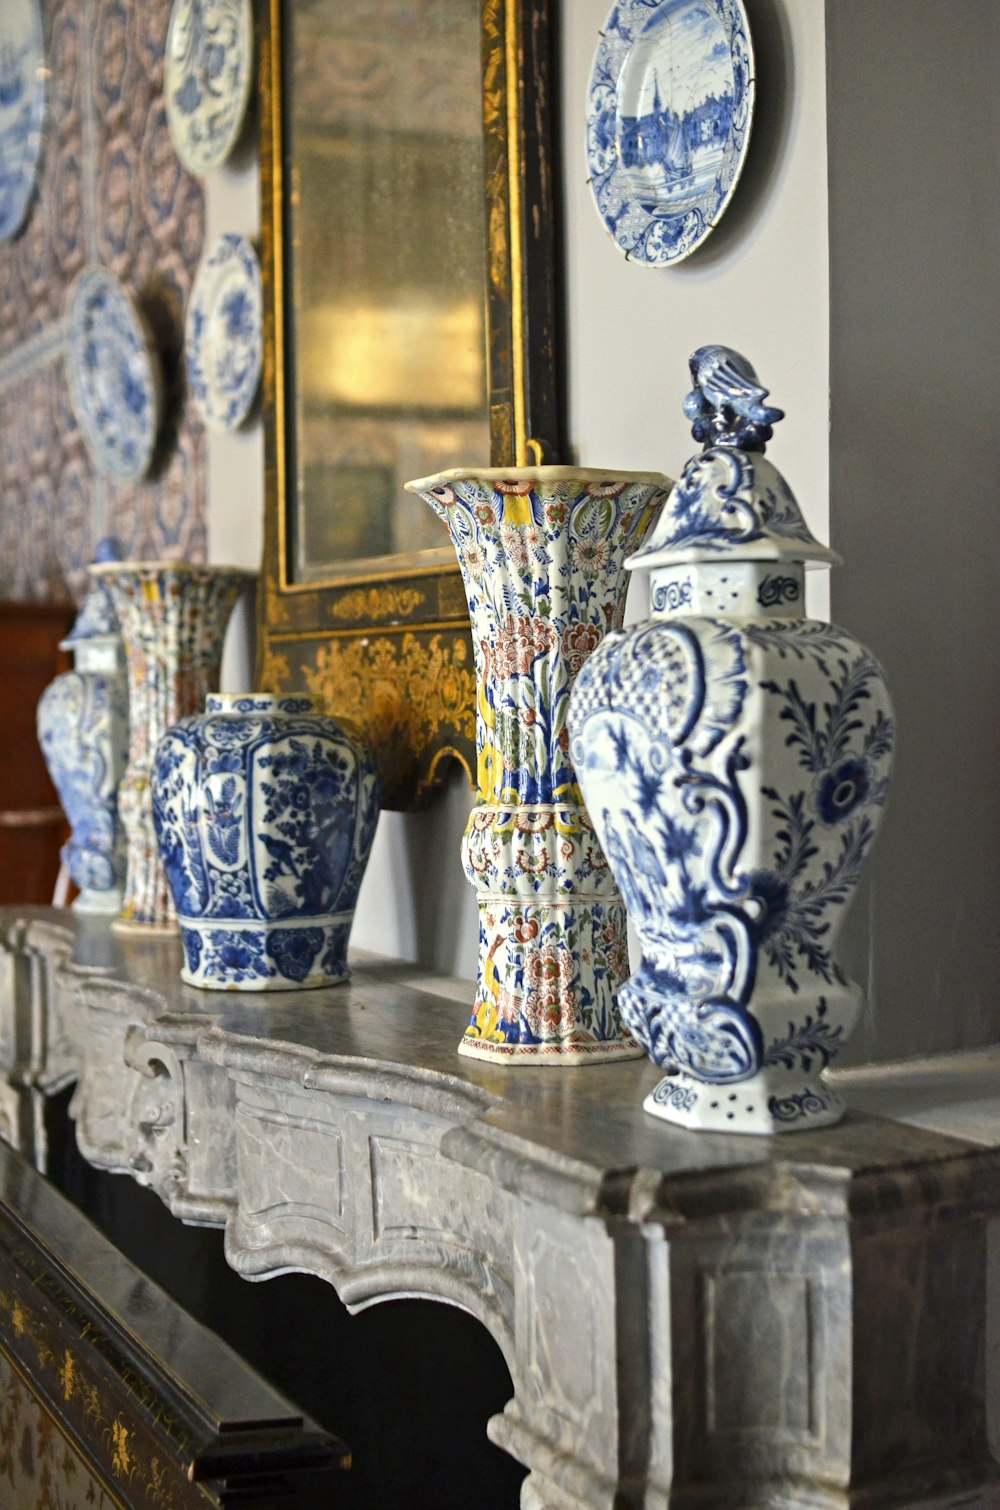 a mantle with blue and white vases on it